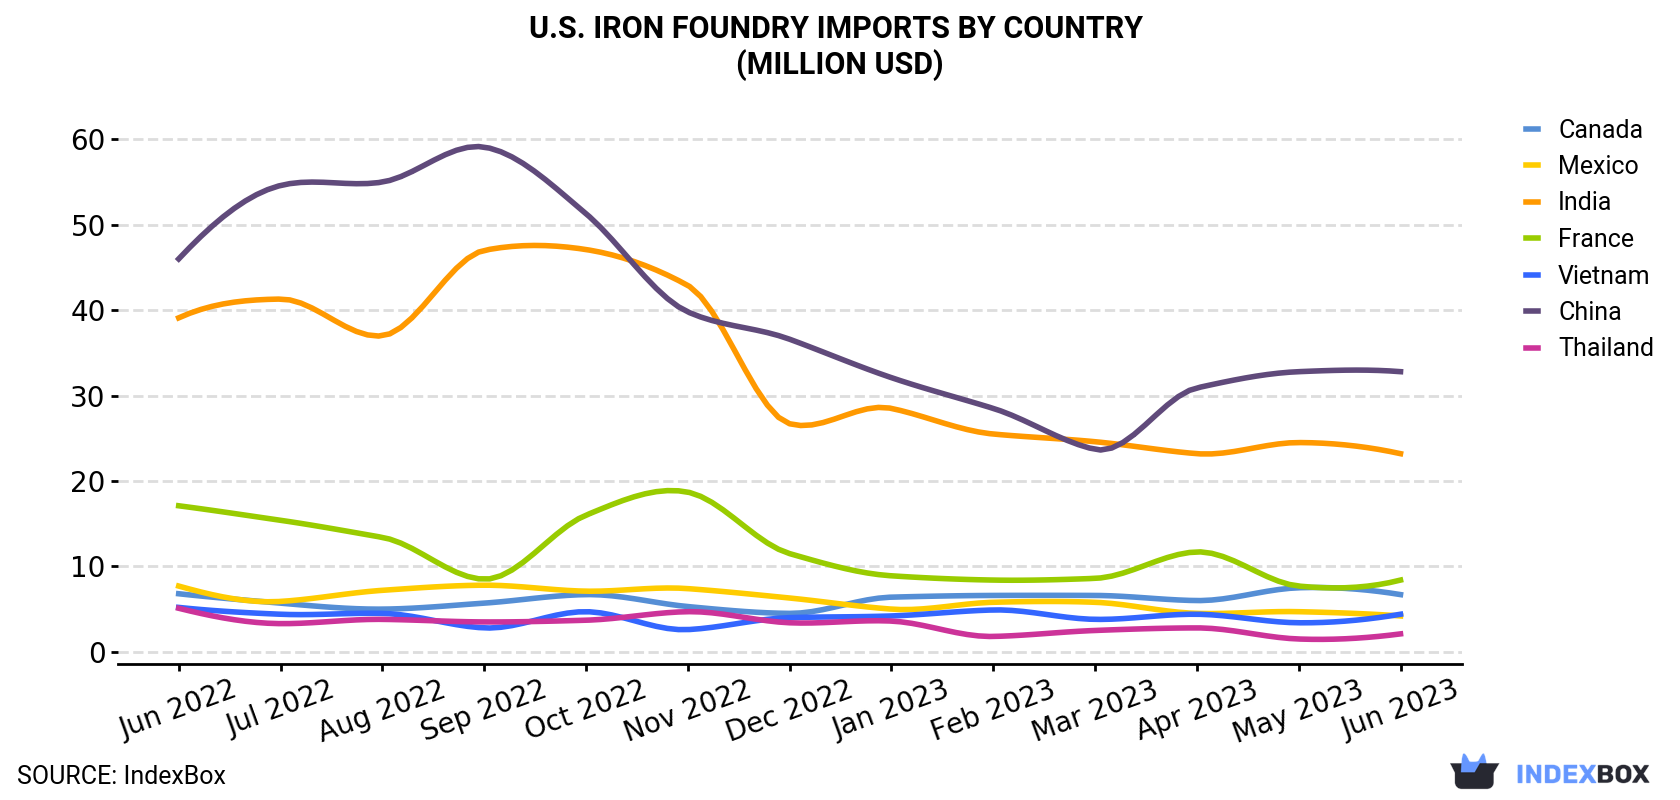 U.S. Iron Foundry Imports By Country (Million USD)